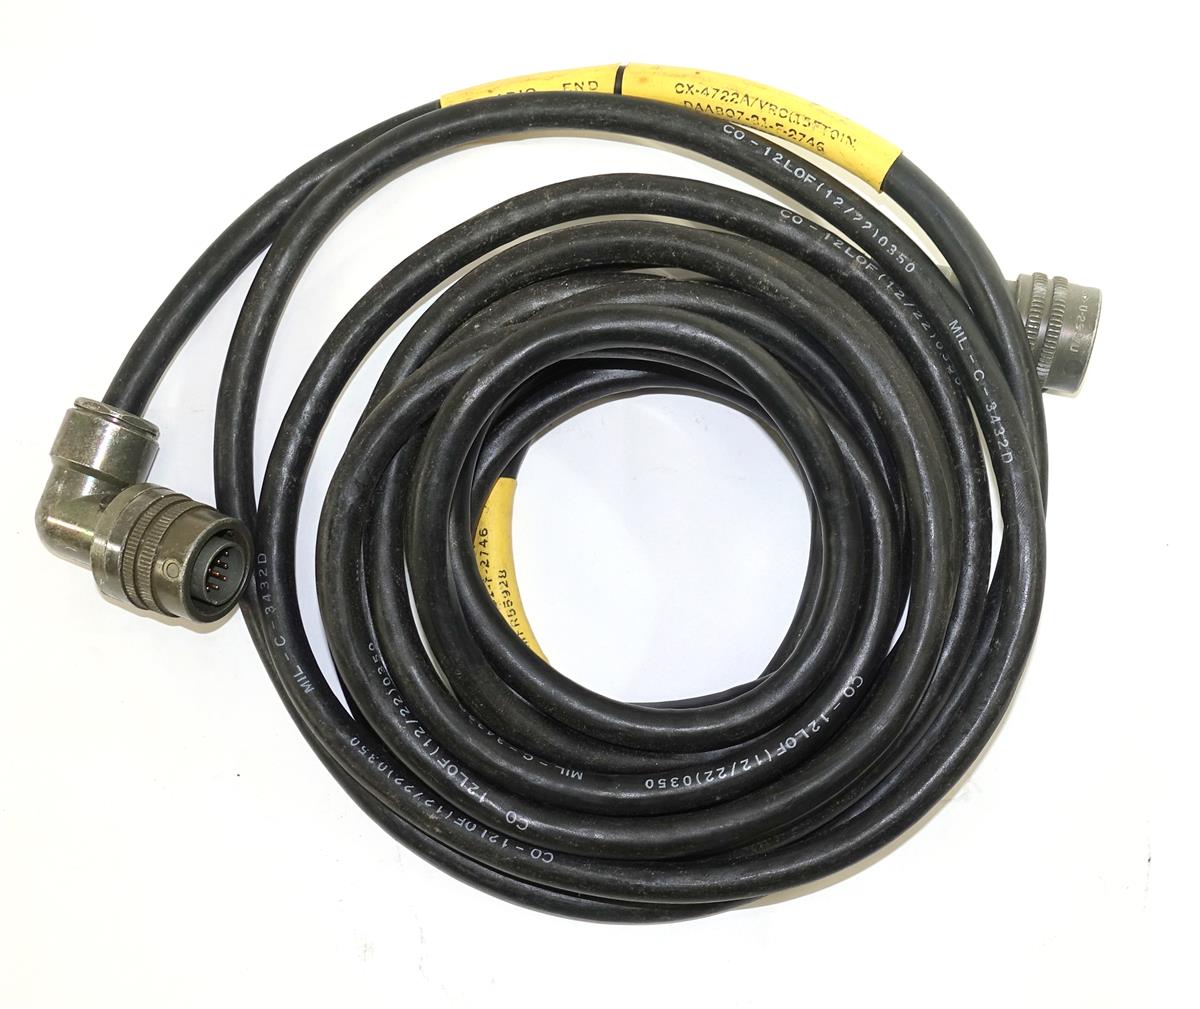 RAD-423 | 6150-01-291-6383 Special Prupose Electrical Cable Assembly (1).JPG